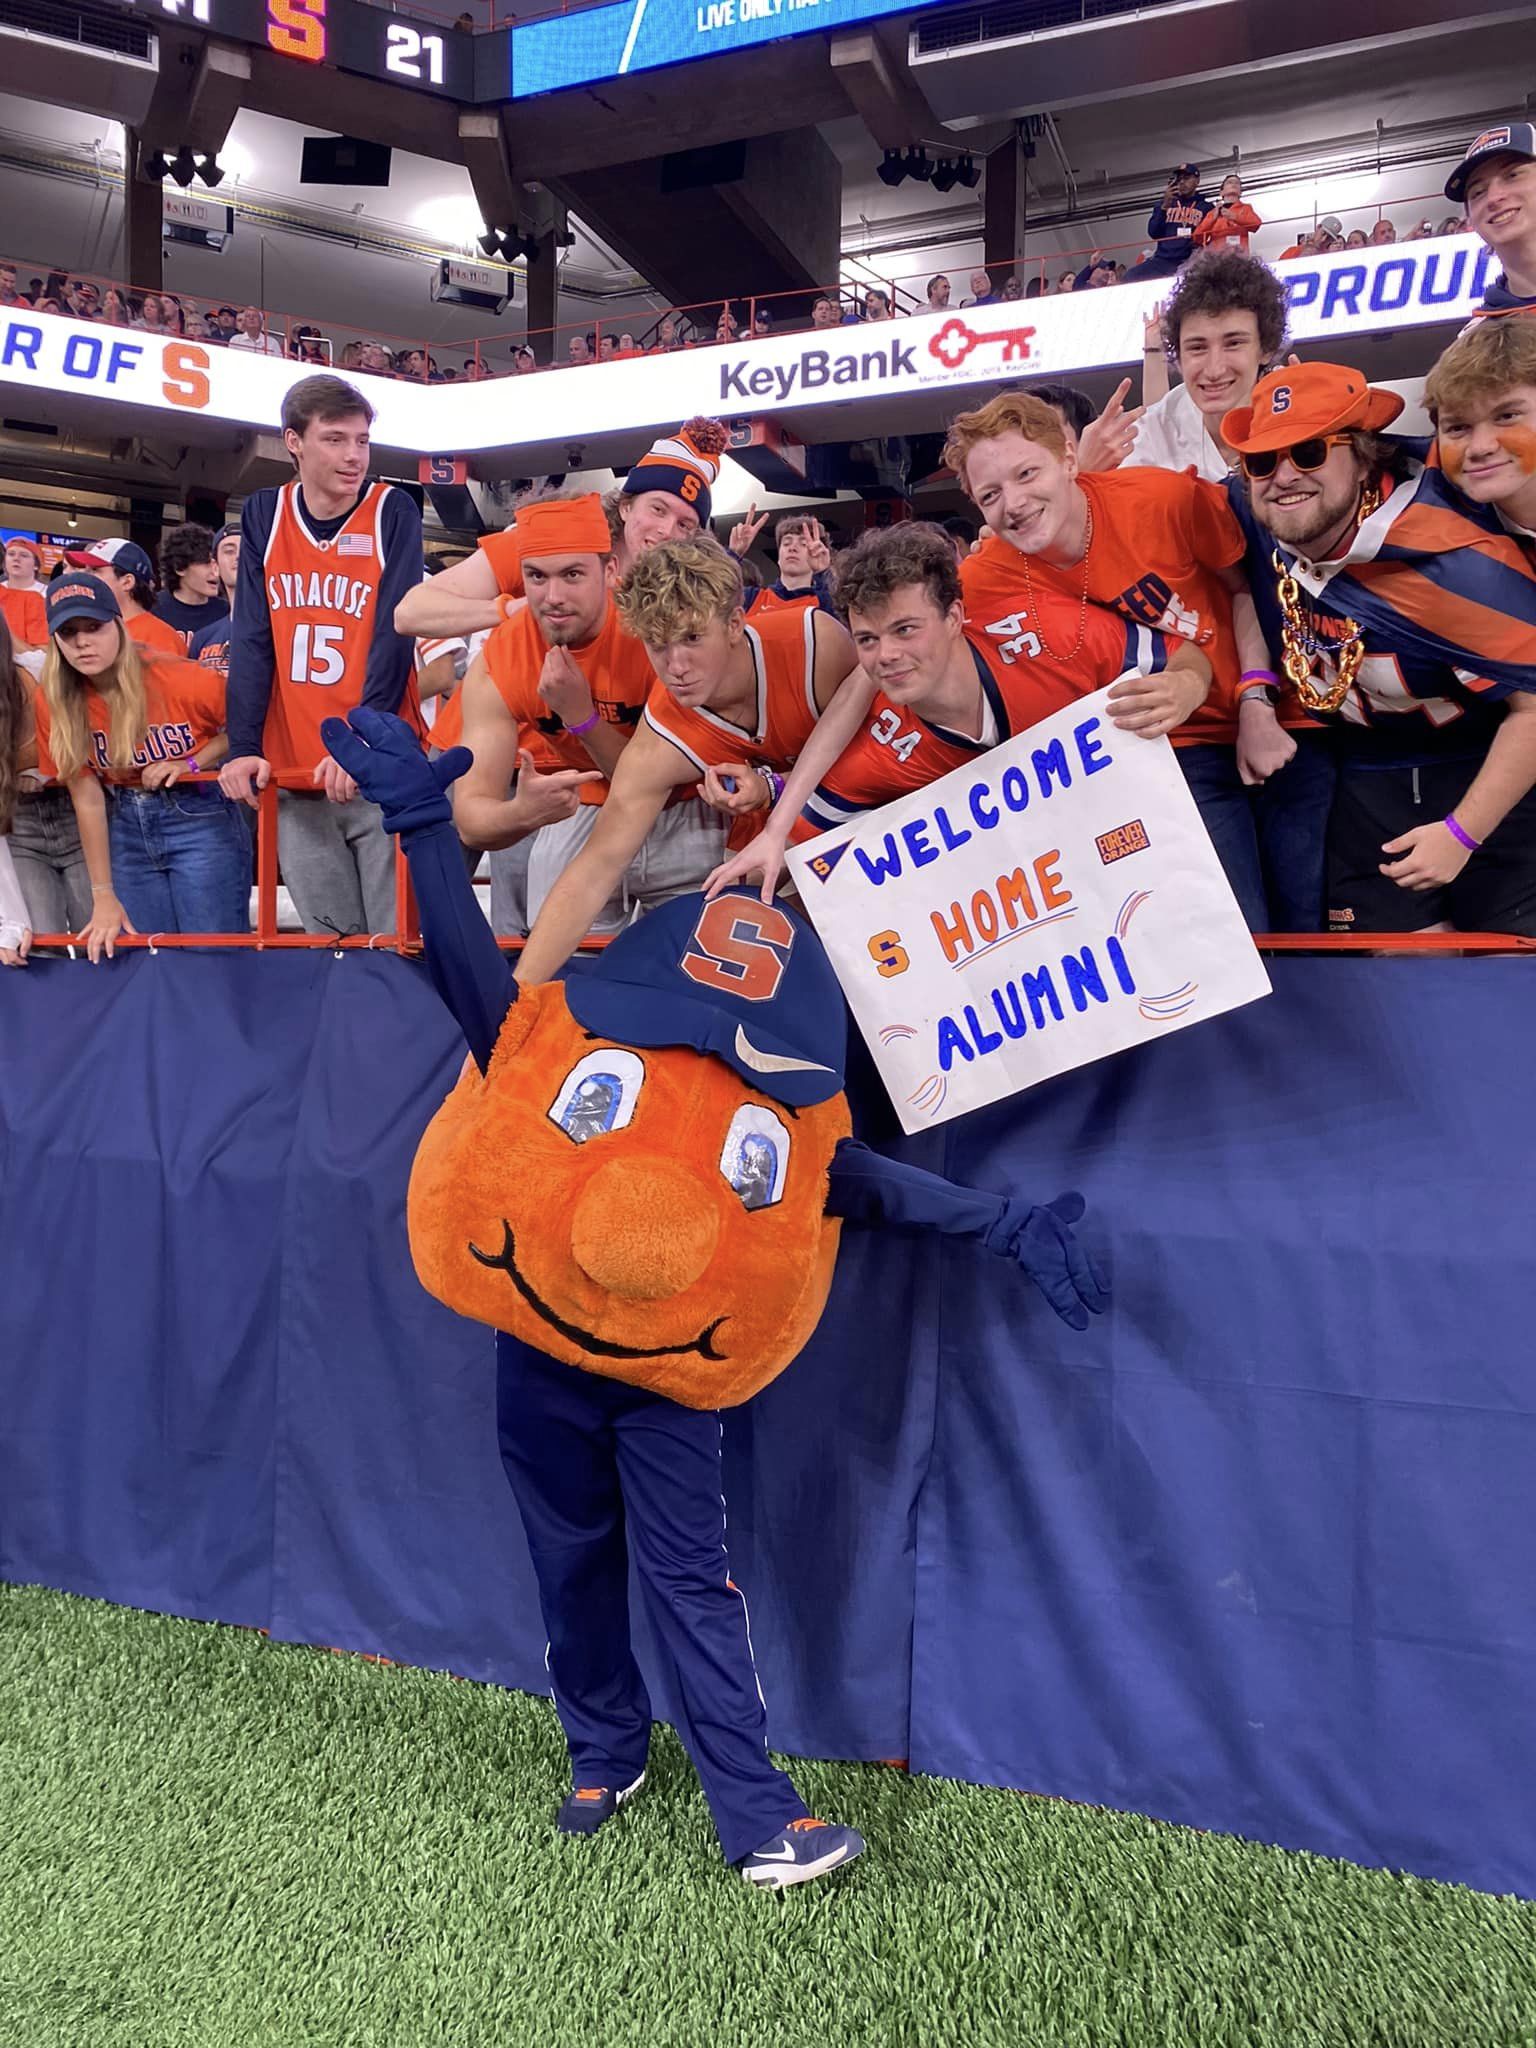 Otto poses with students during the football game.